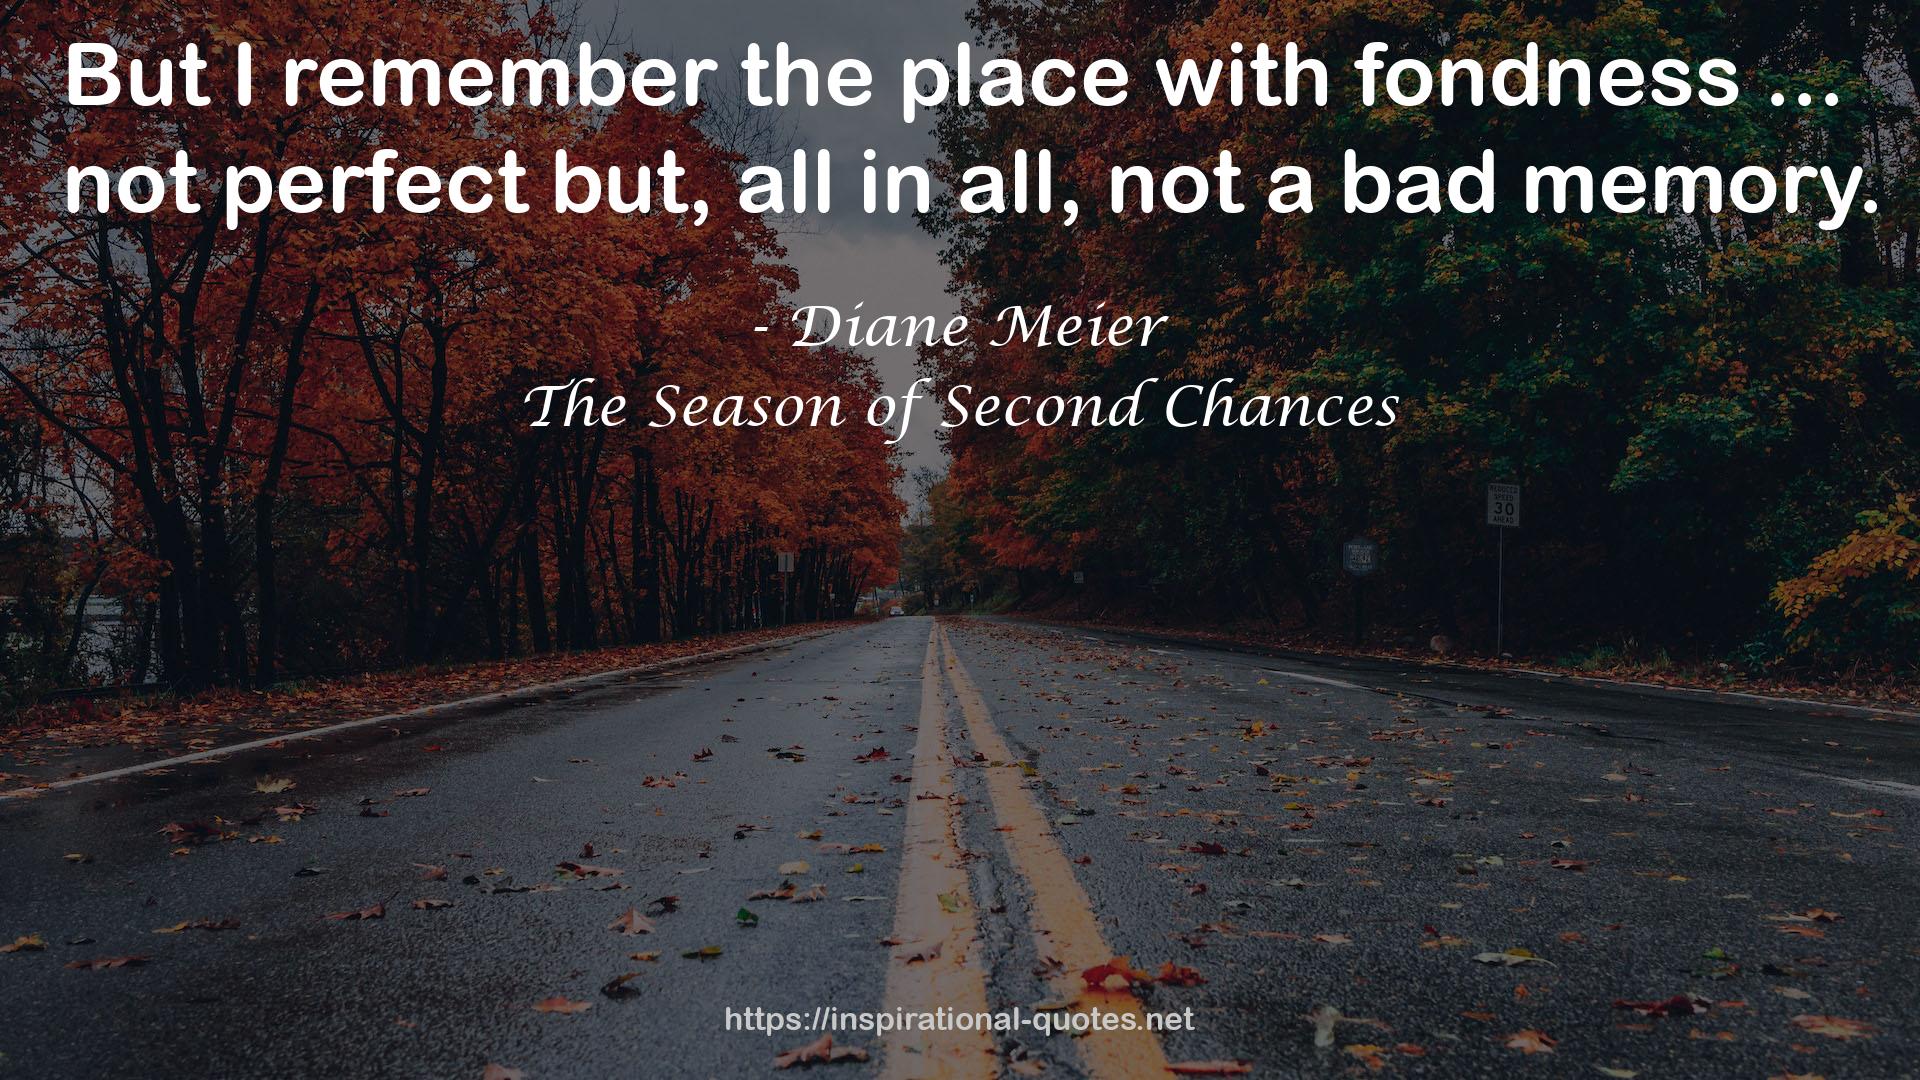 The Season of Second Chances QUOTES